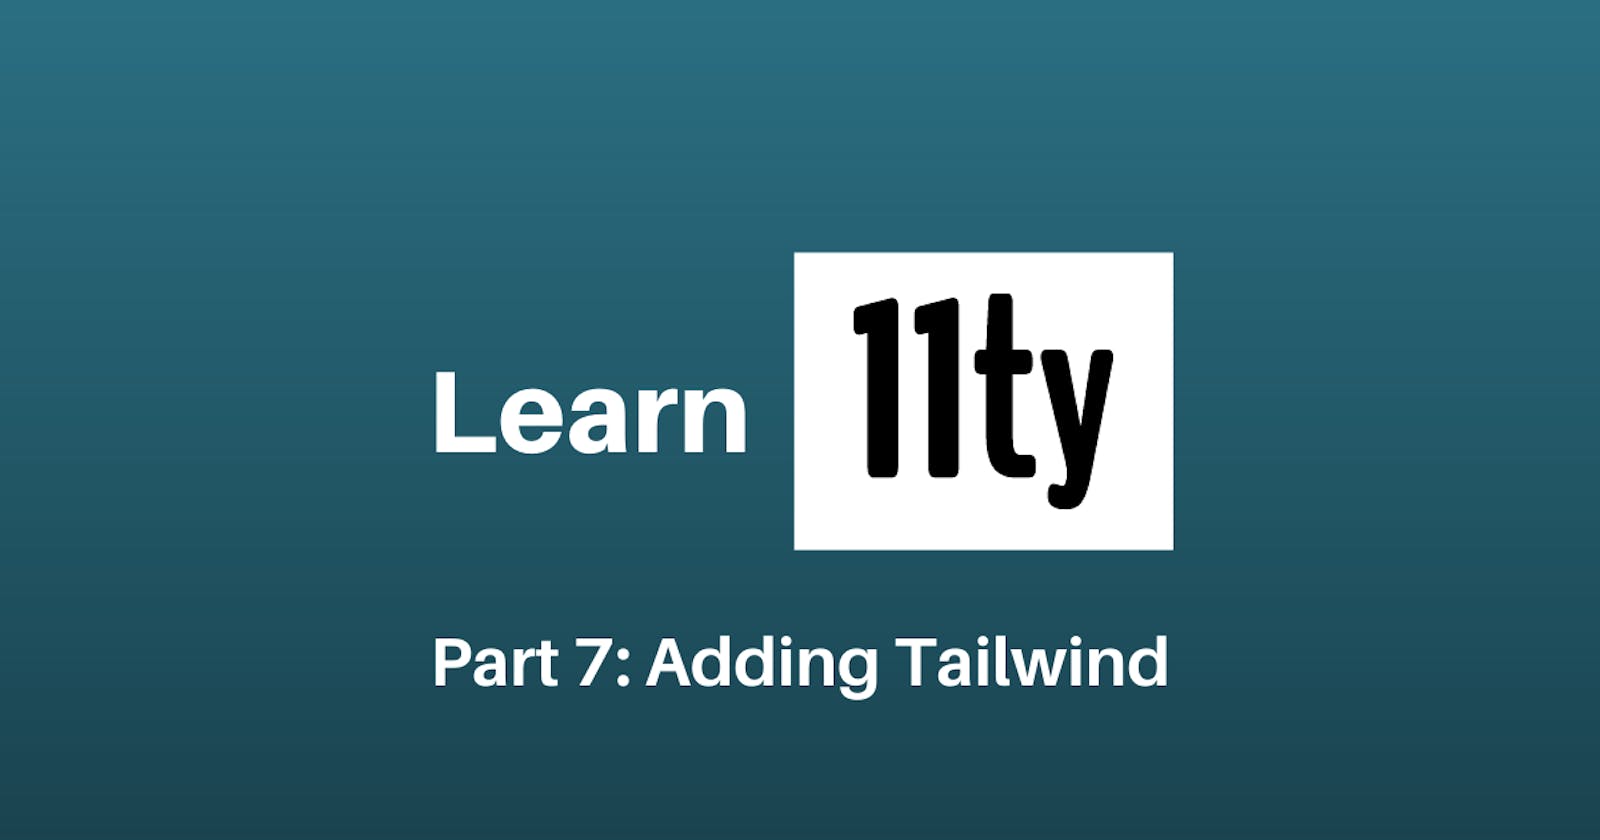 Let's Learn 11ty Part 7: Adding Tailwind